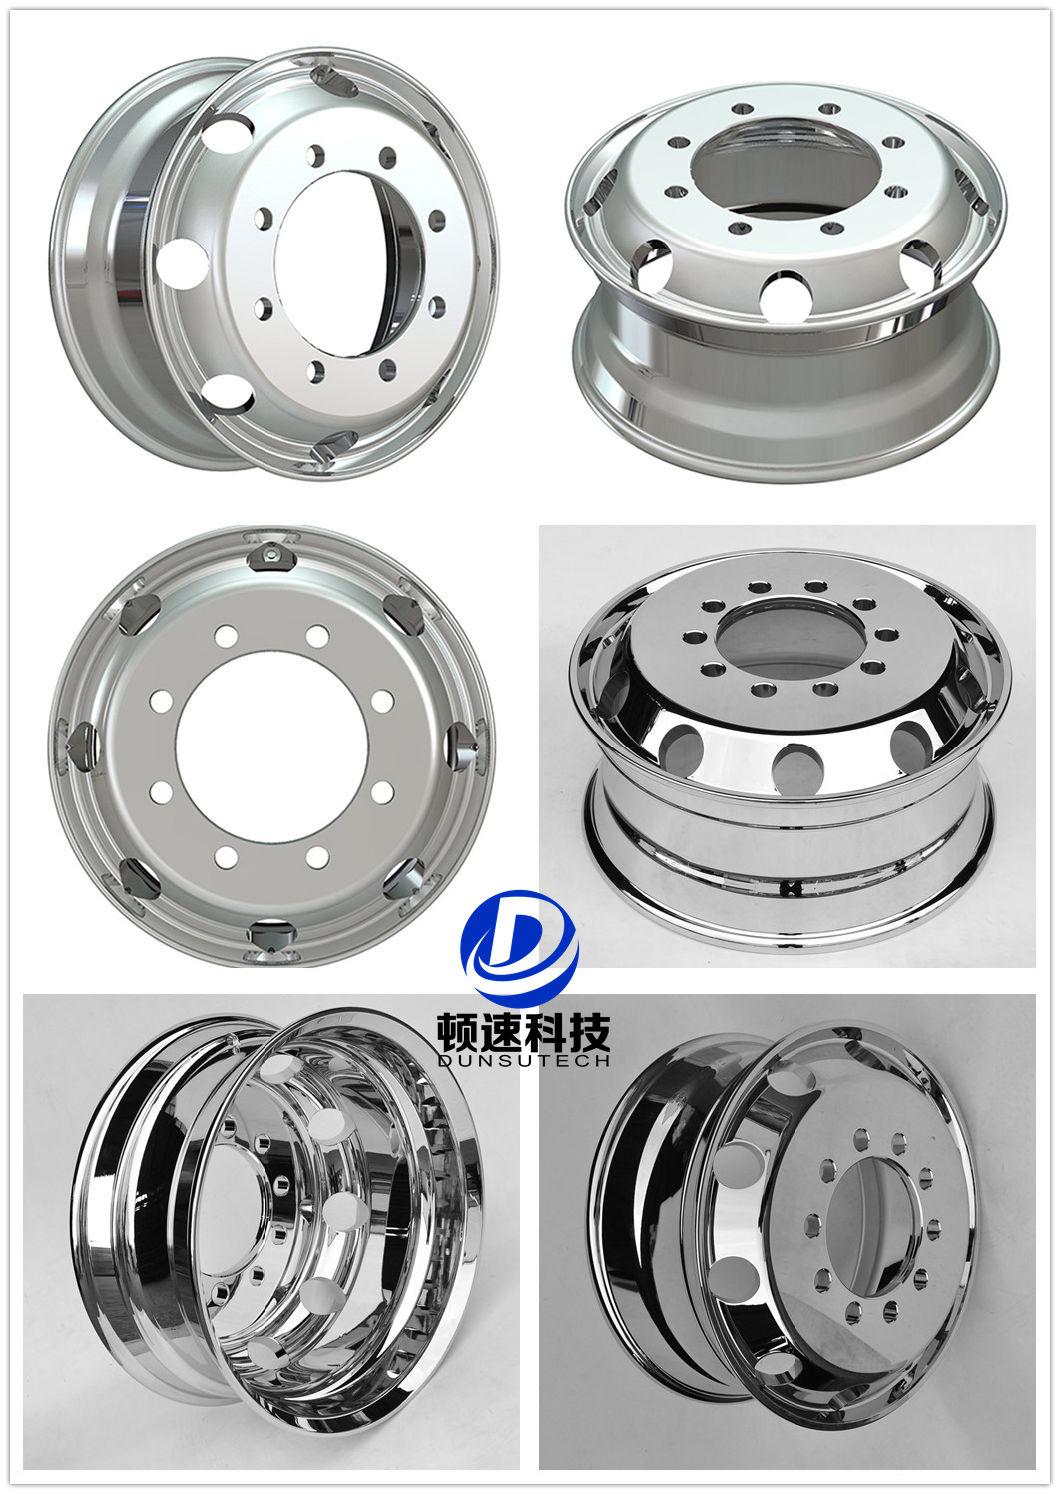 Good Quality Chrome Spoke Wire Wheels for Cars Truck Wheel 22.5X8.25 22.5X7.5 22.5X9 22.5X11.75 Made in China